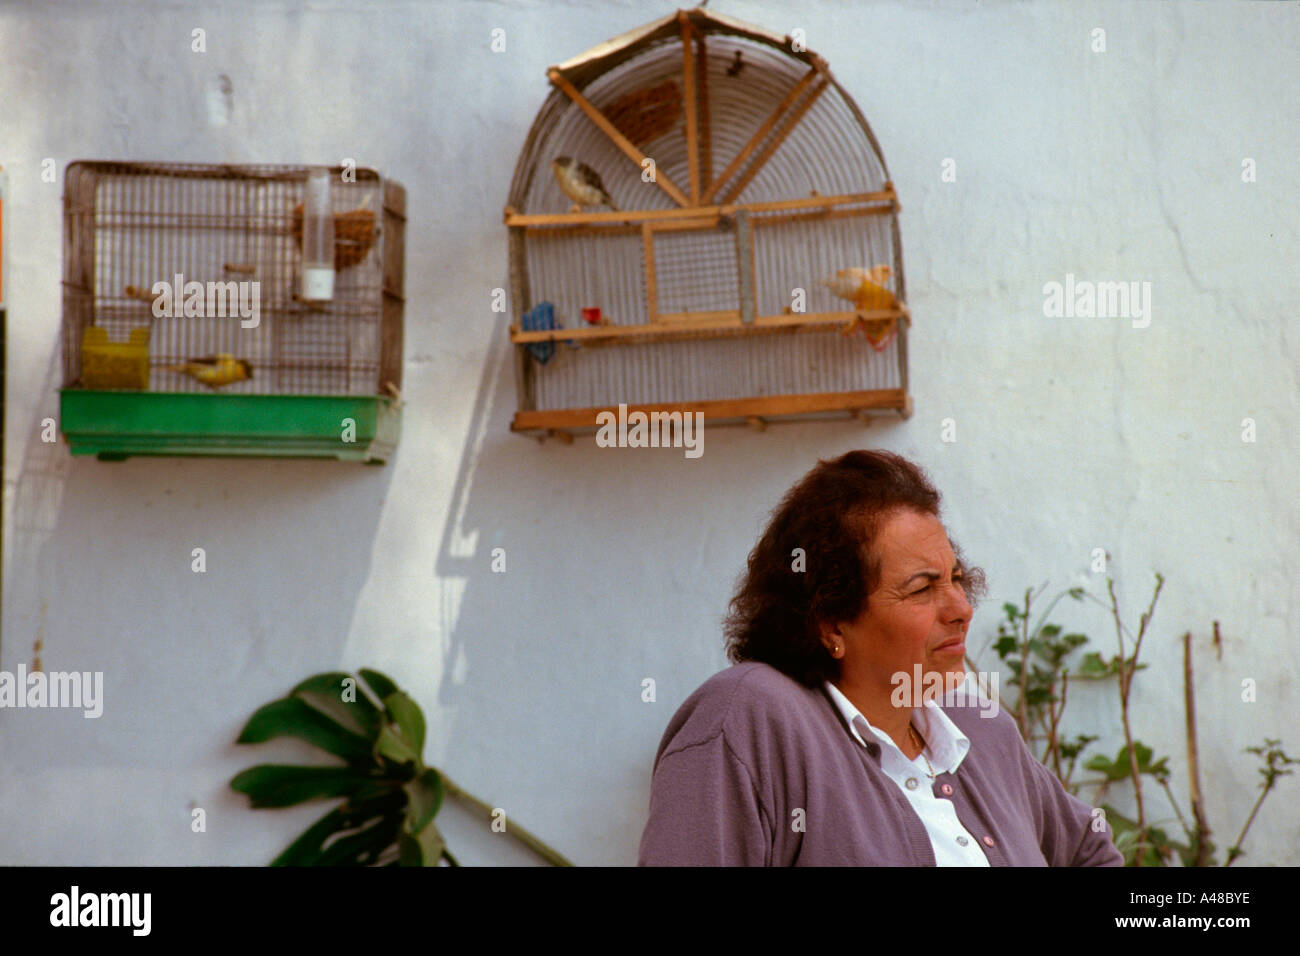 Woman and bird cages / Lagos Stock Photo